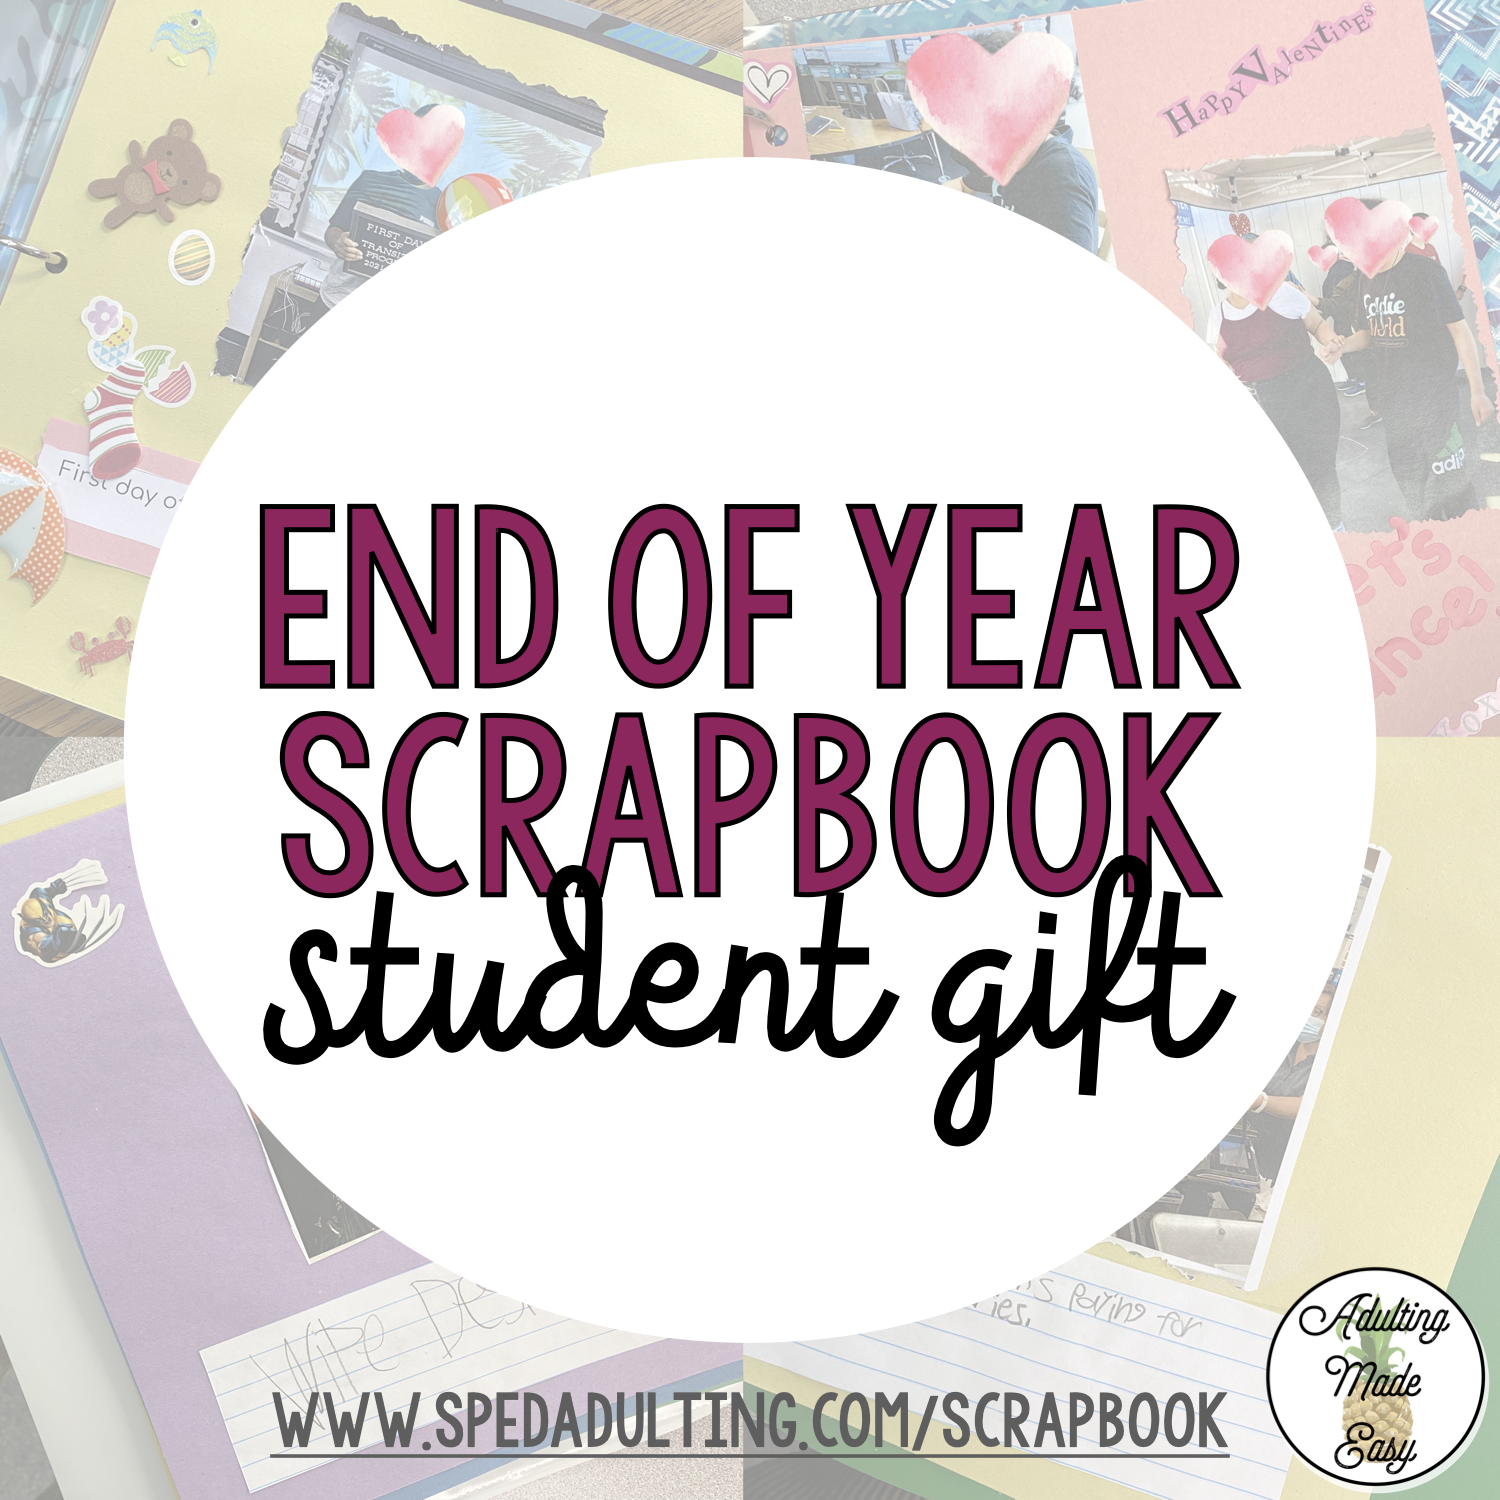 Your creative resource for stamping and scrapbooking